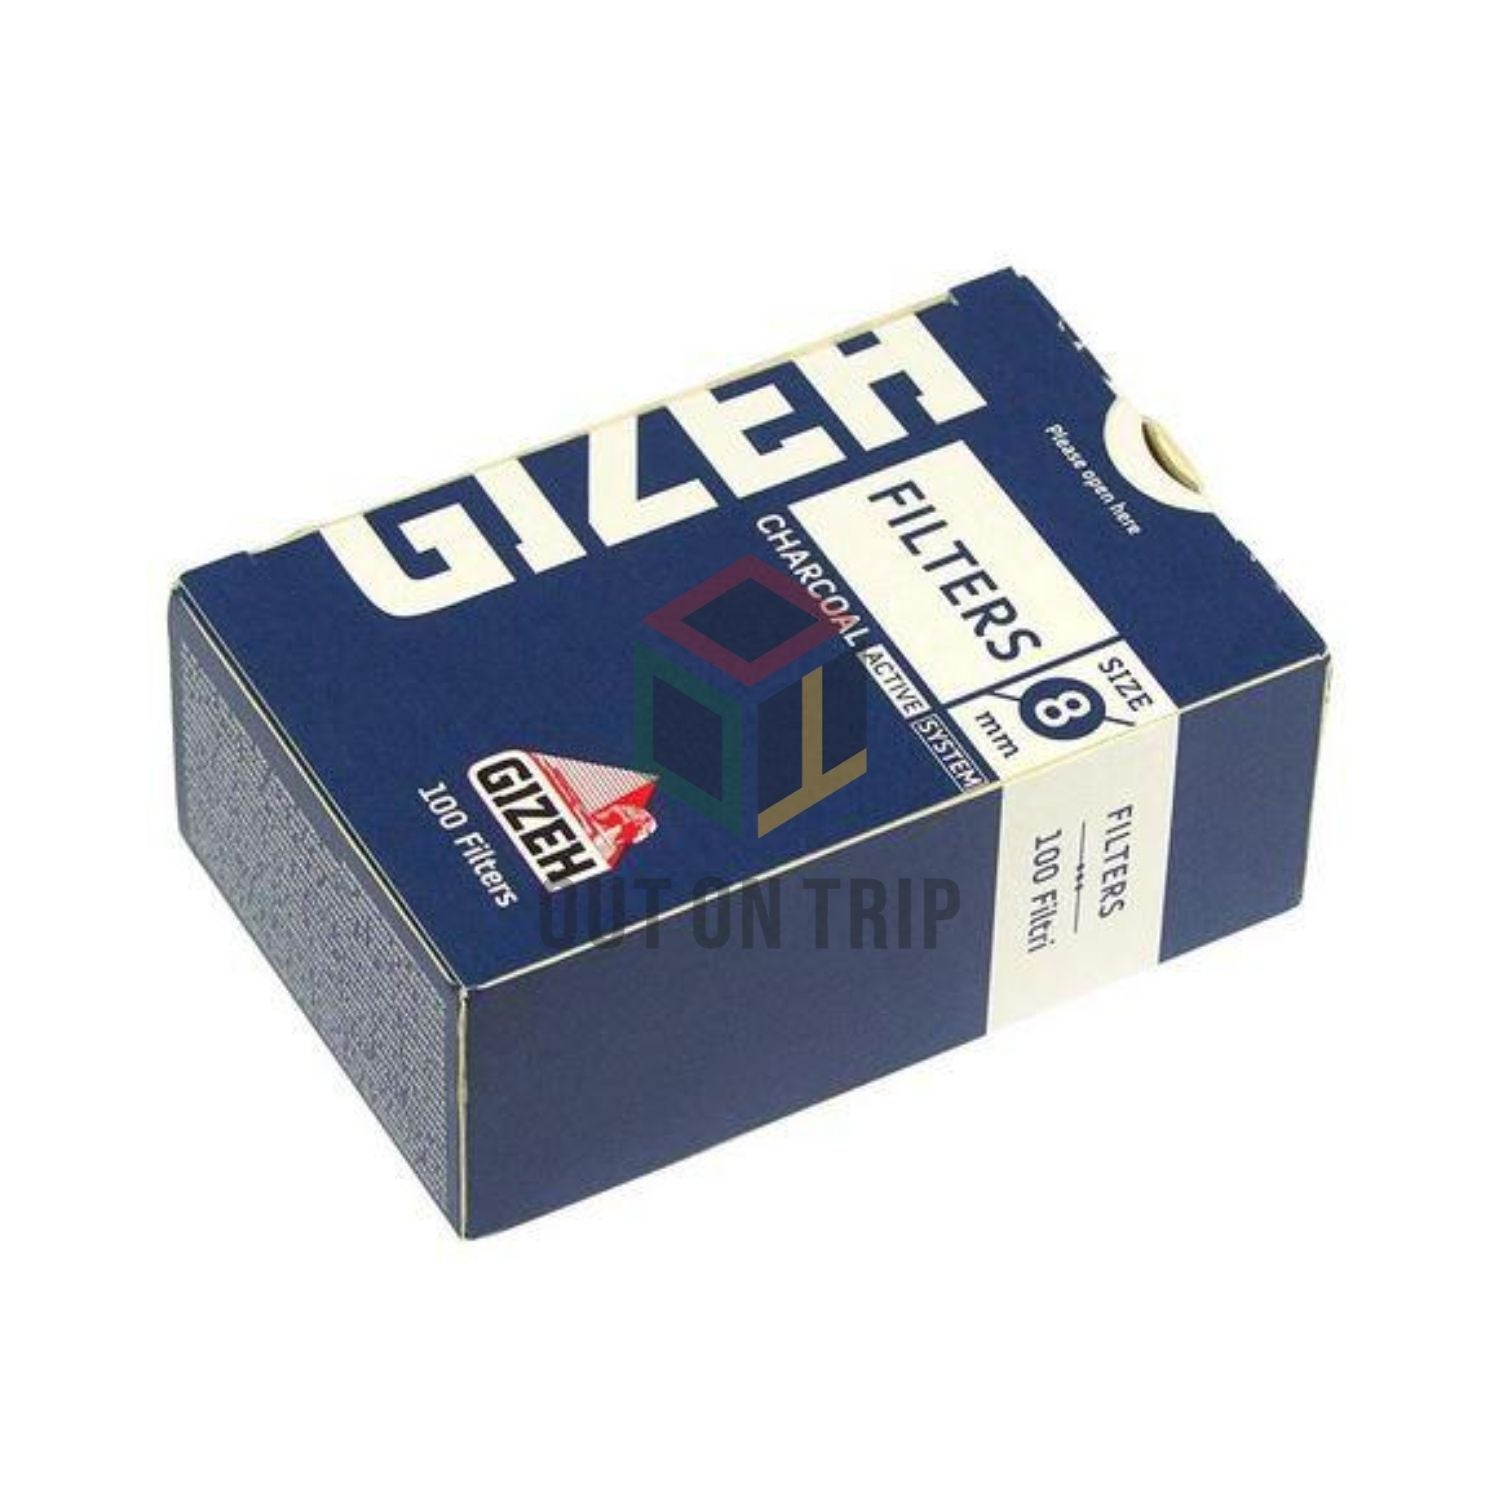 Buy Gizeh Active Charcoal Smoking Filter Tips Online